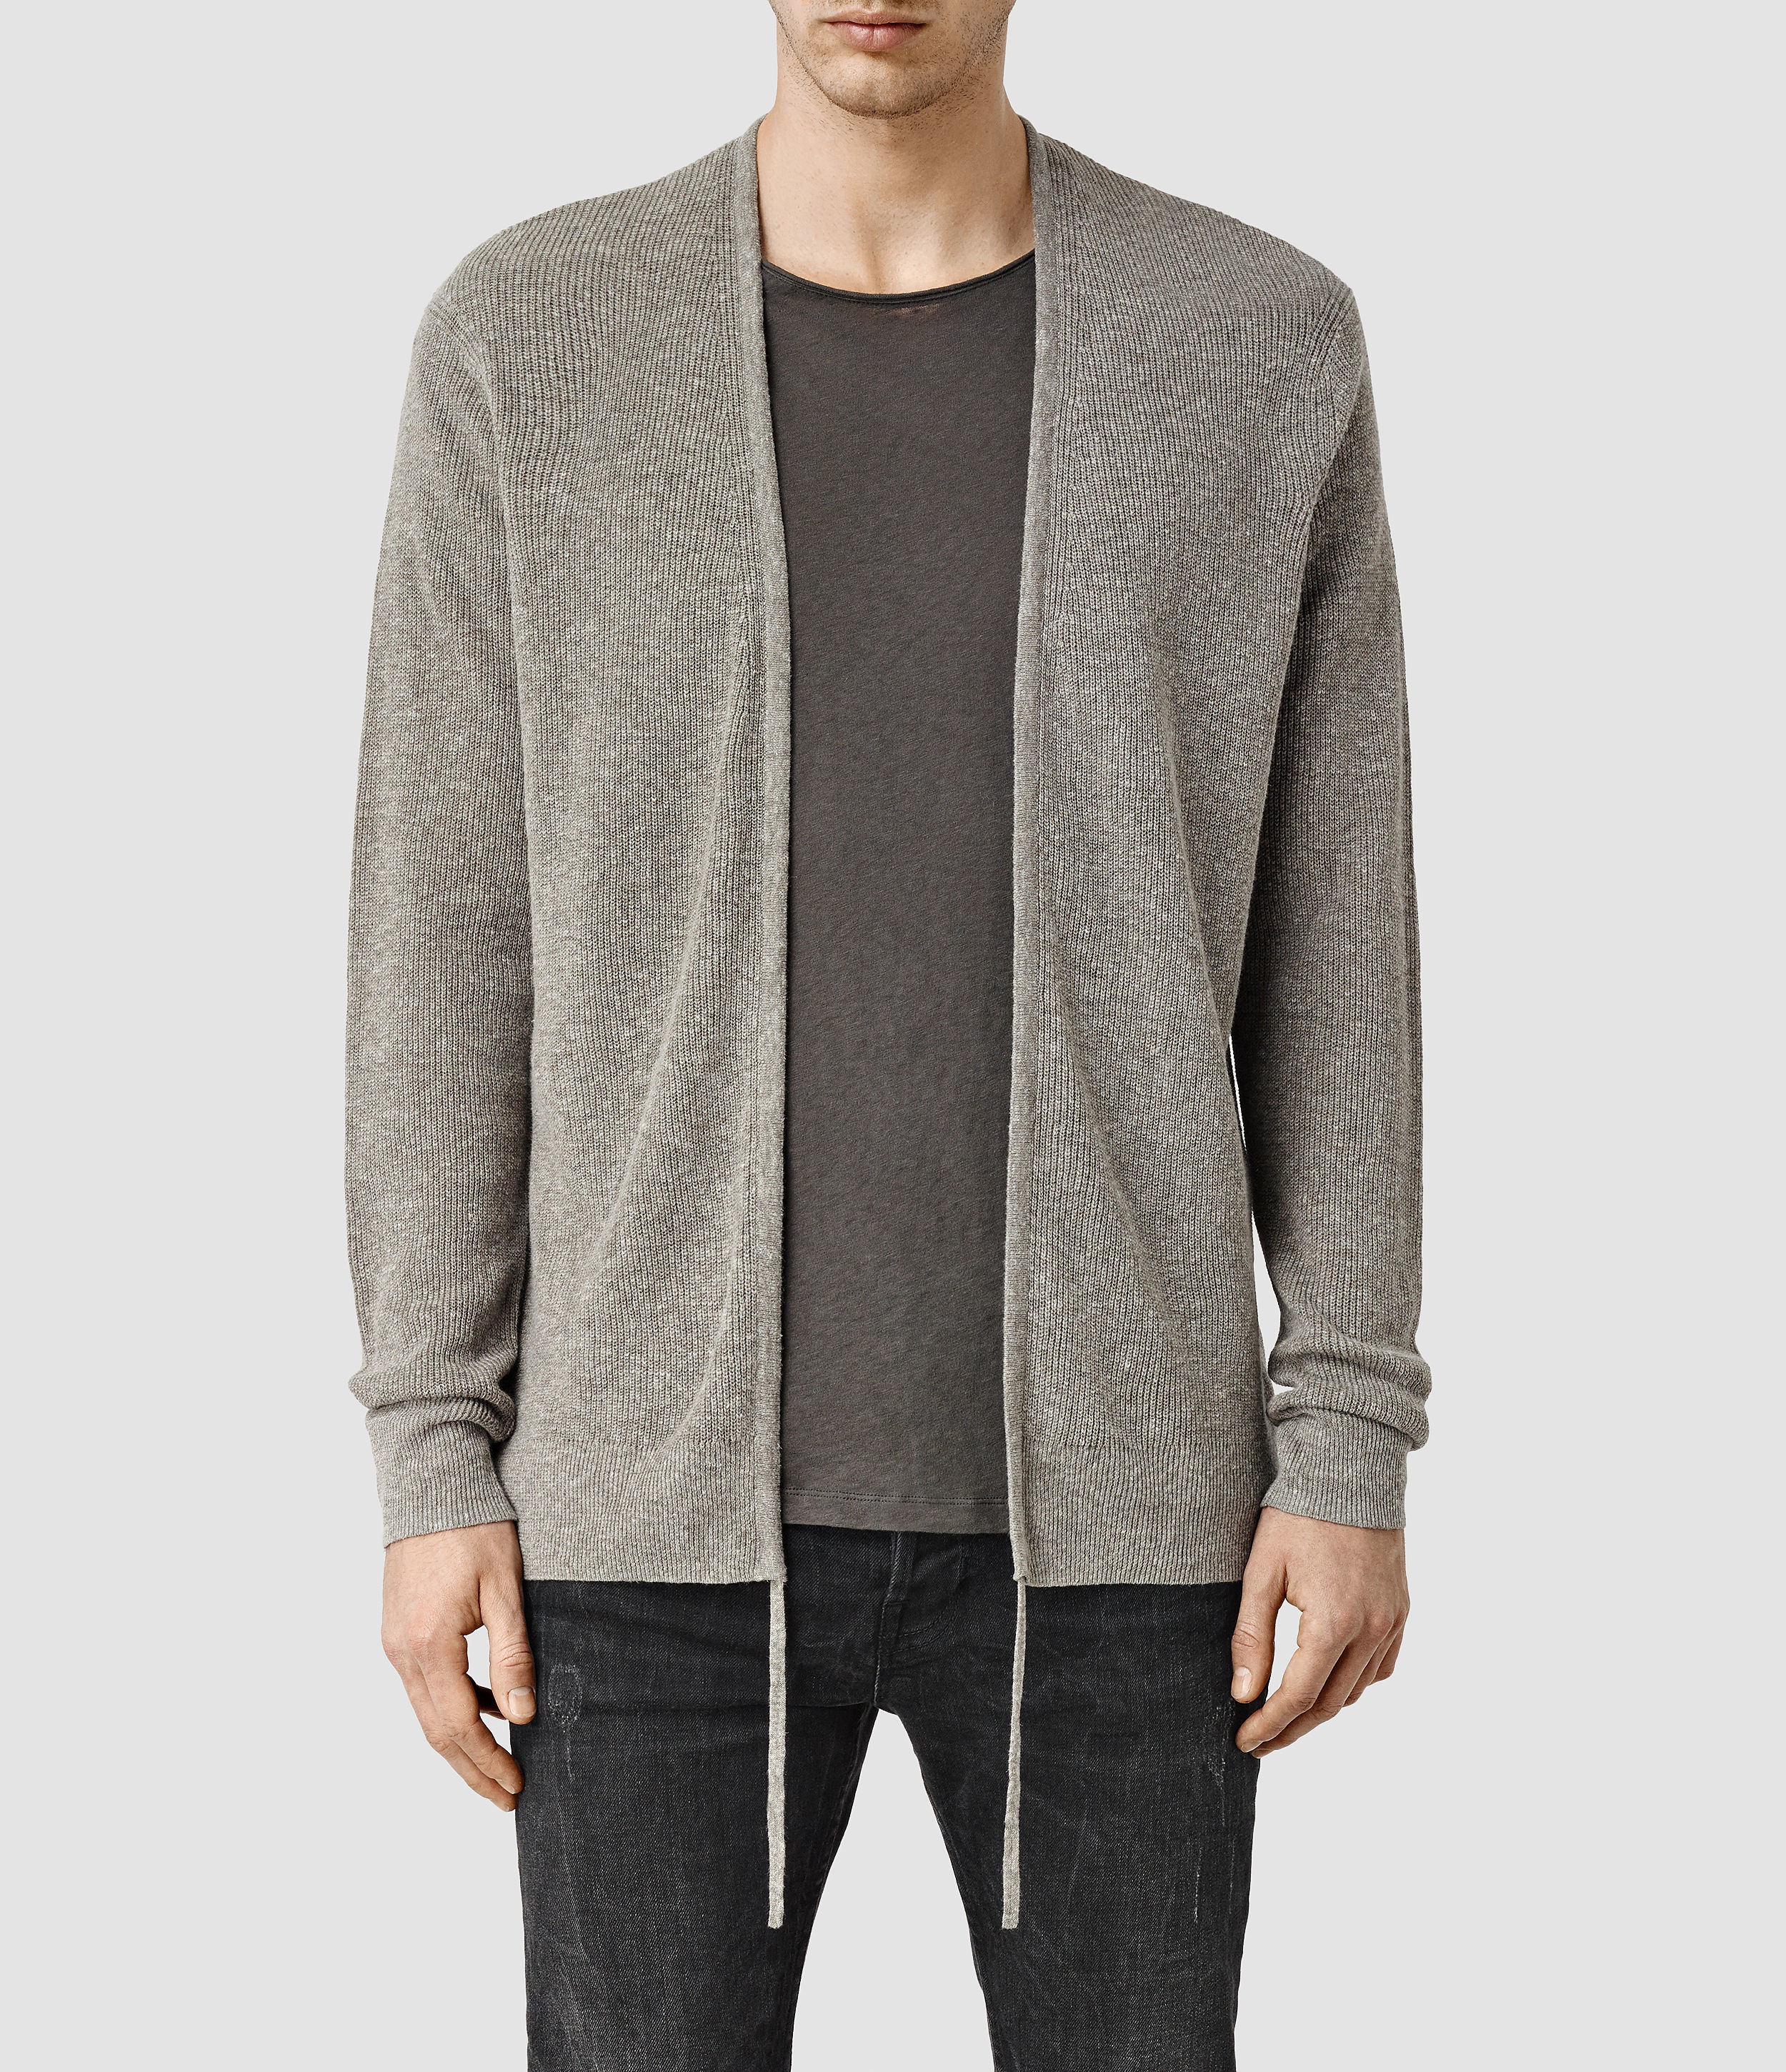 AllSaints Linen Tine Cardigan in Military Grey (Gray) for Men - Lyst